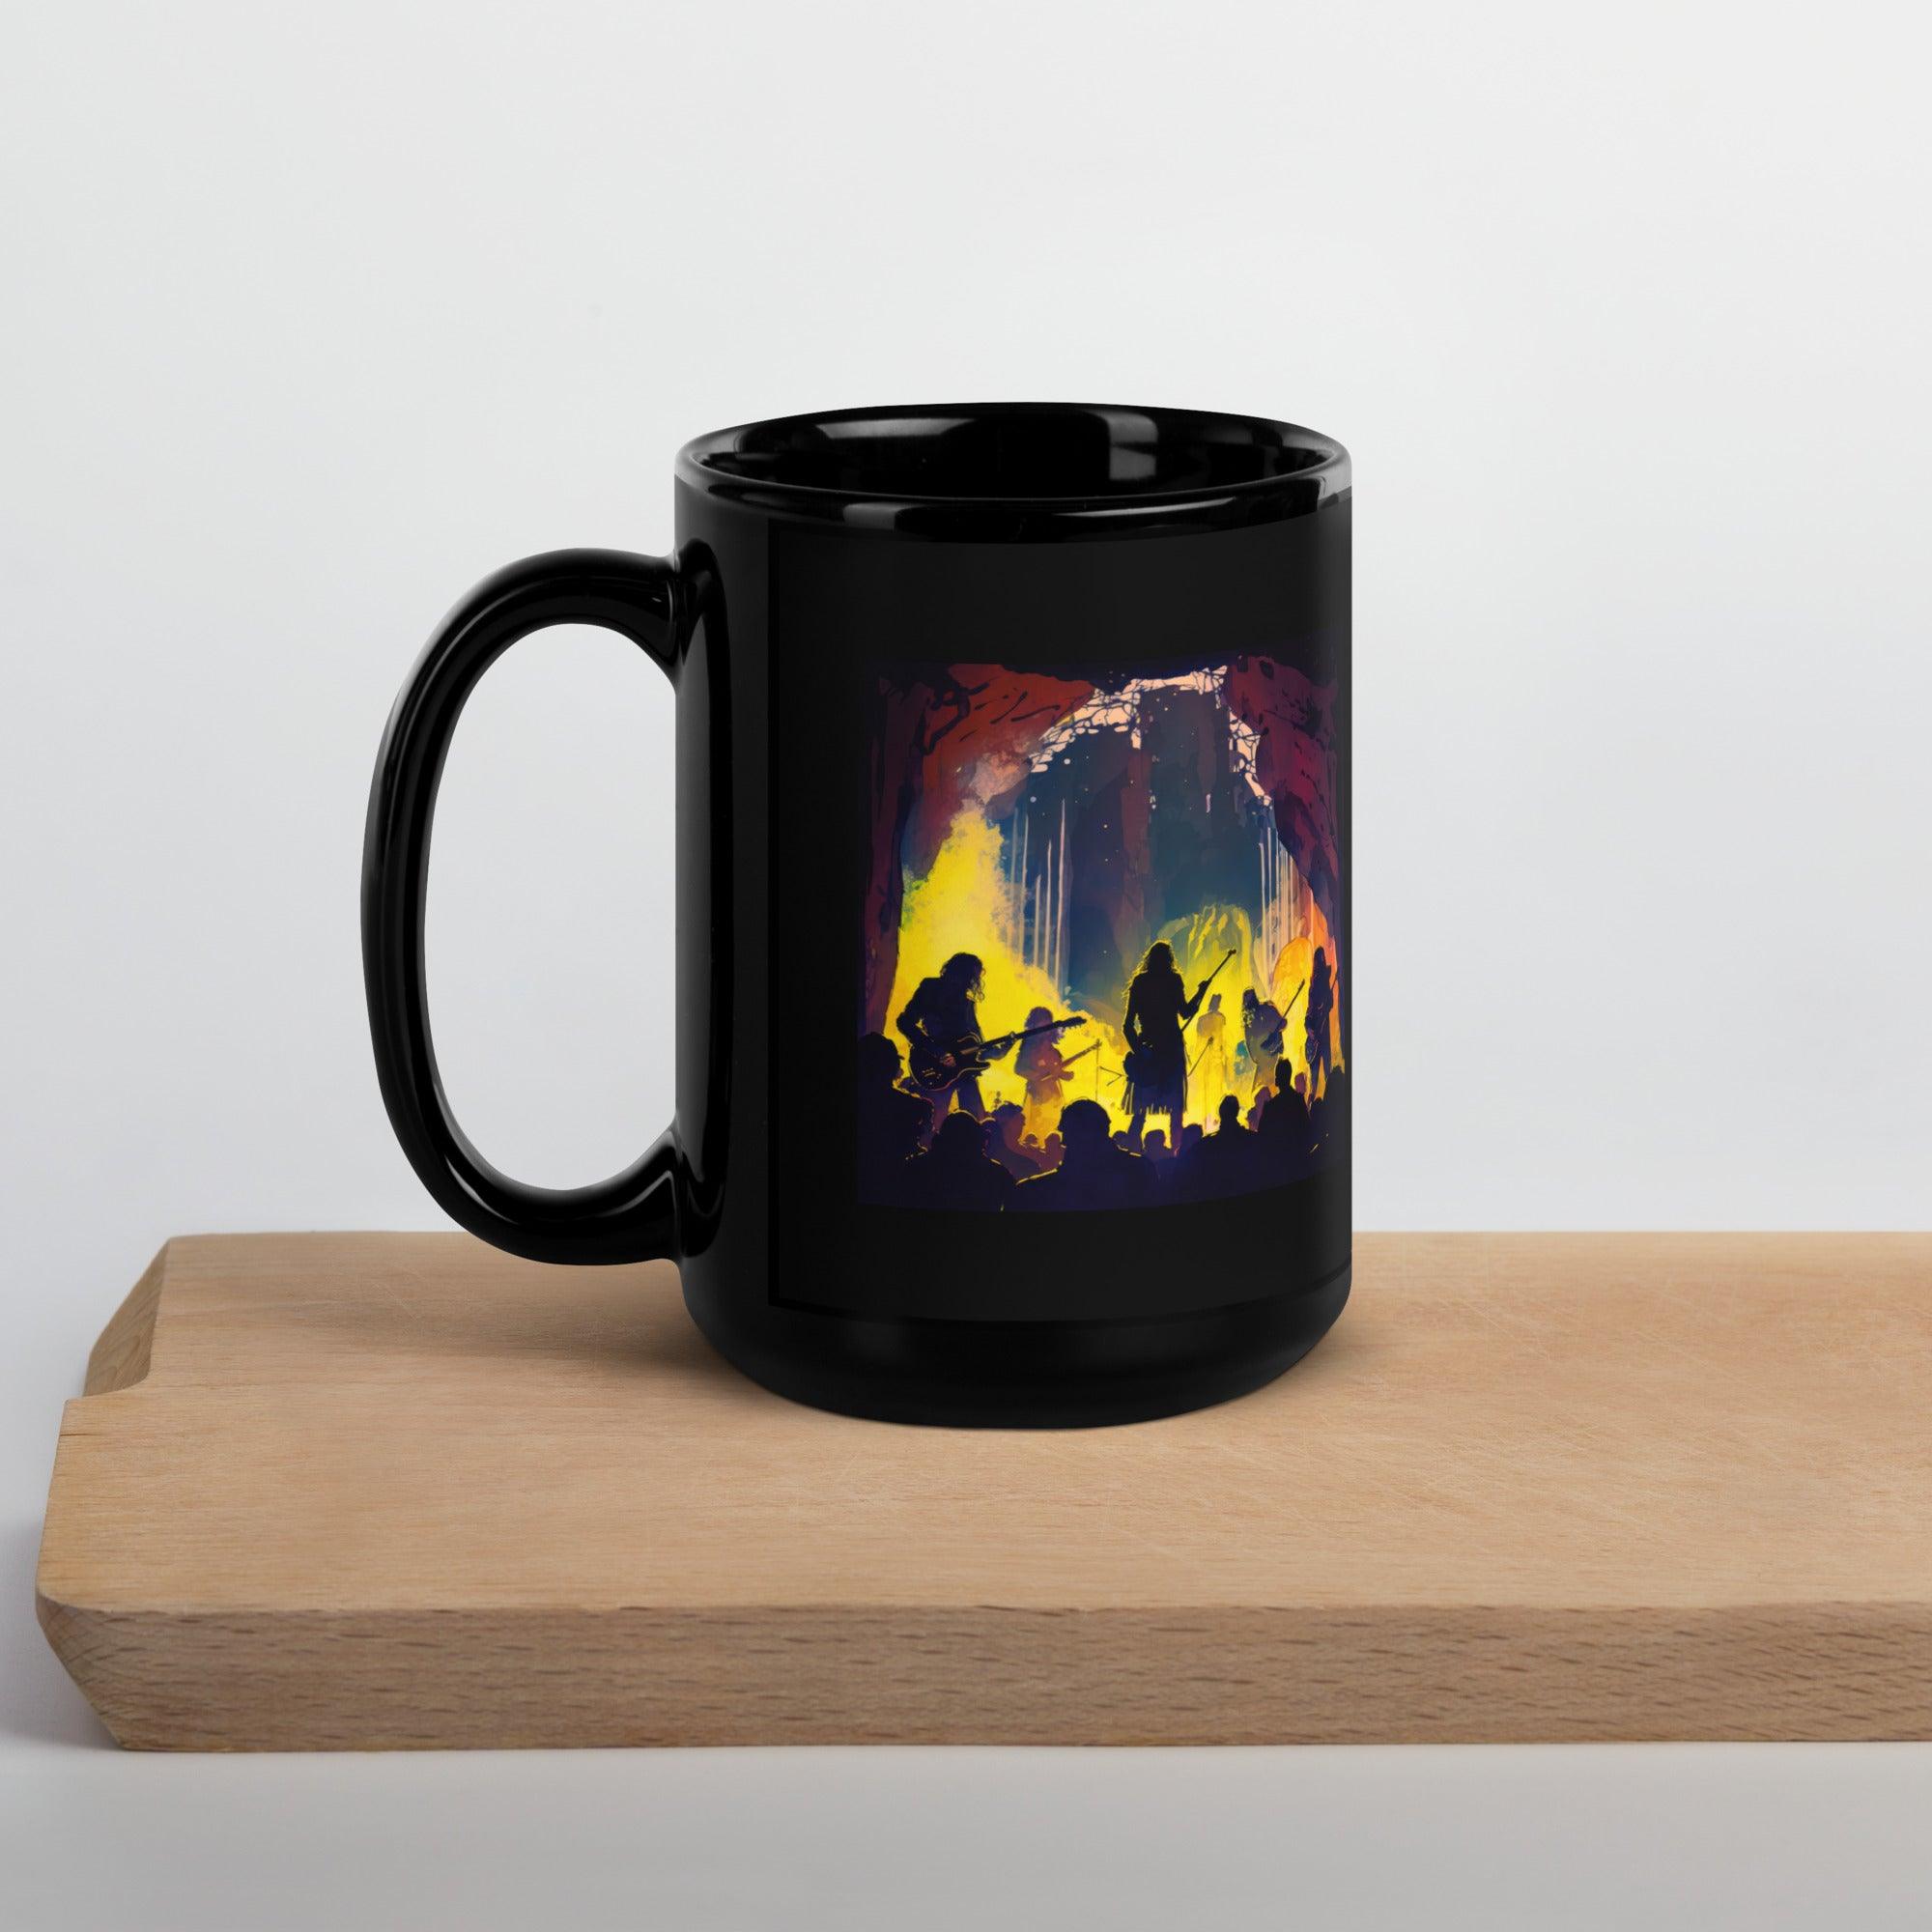 NS-849 Black Mug filled with coffee, steam visible, morning light.